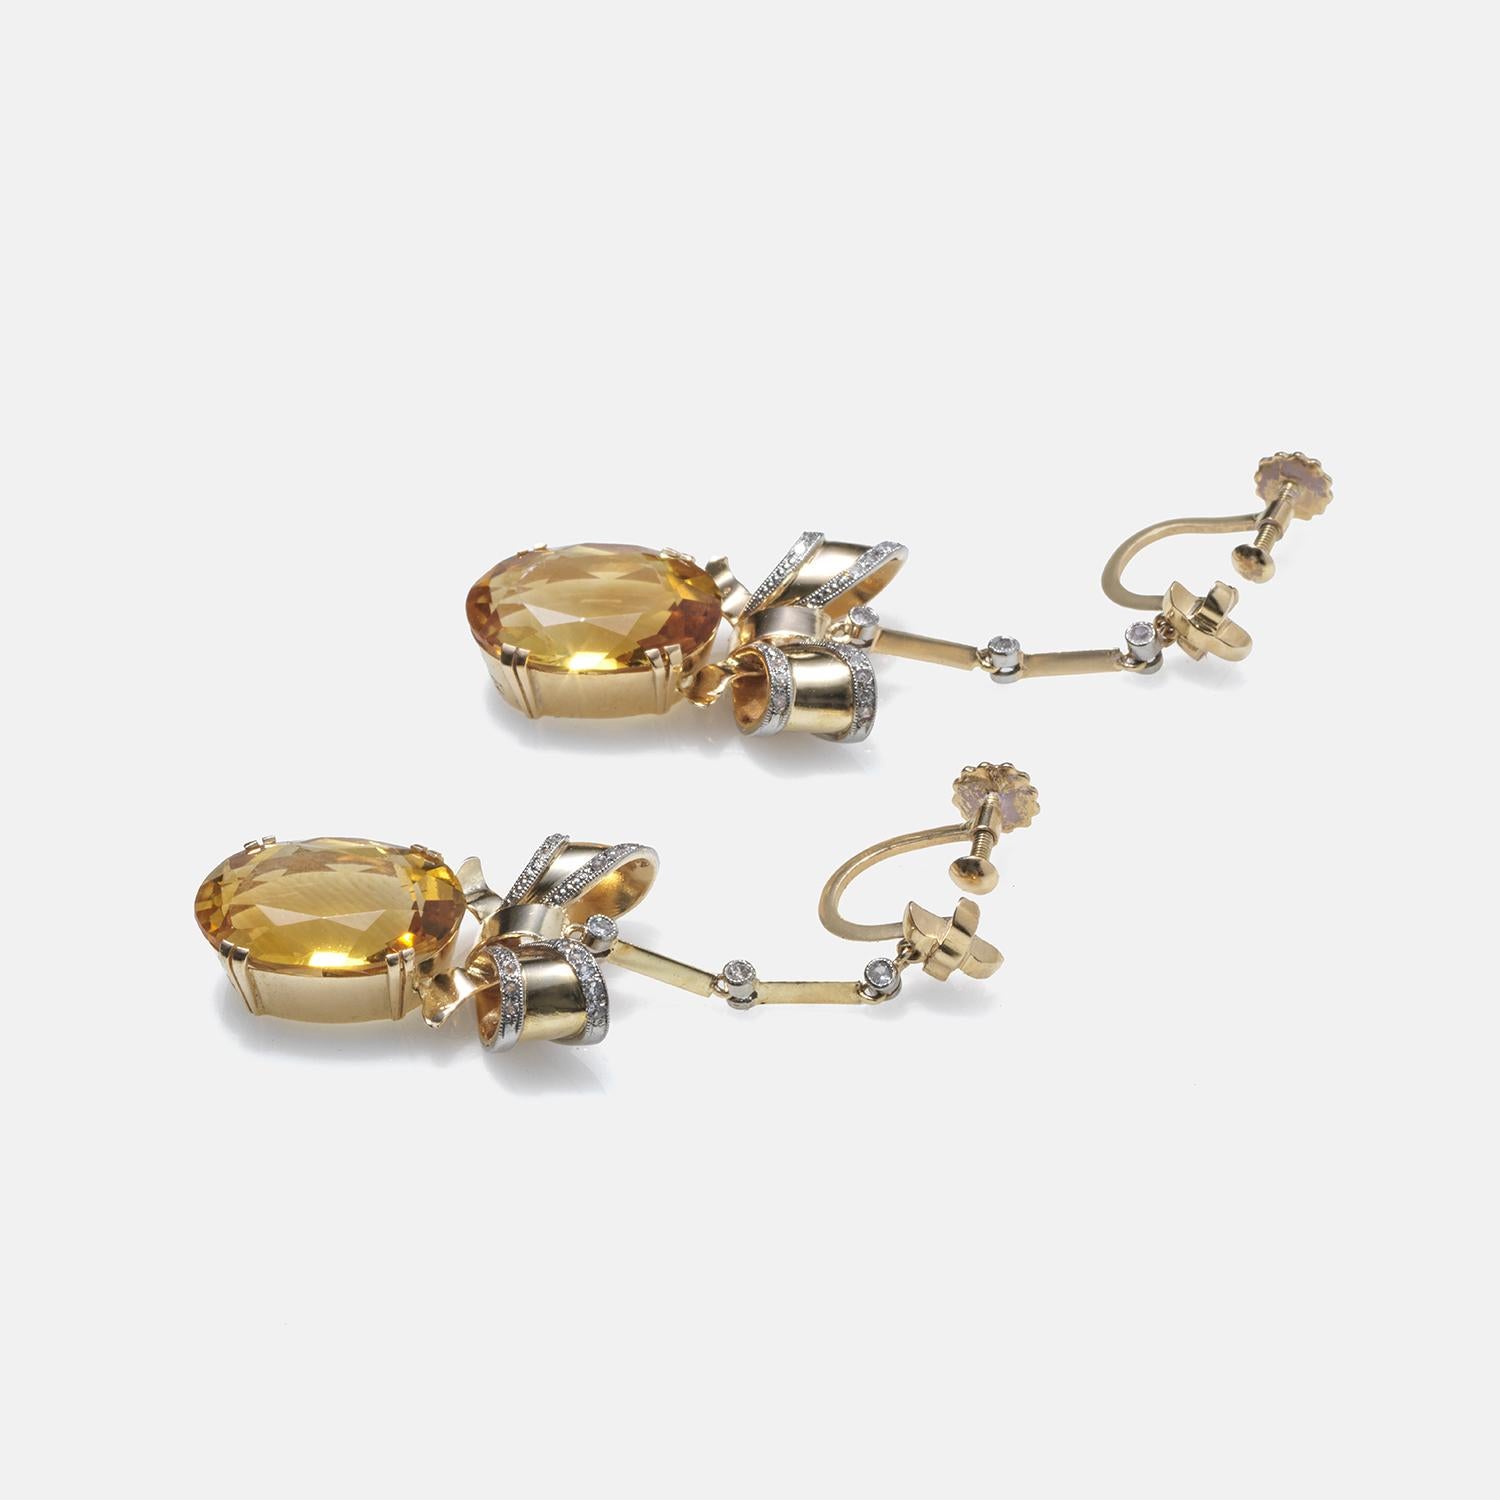 Vintage 18k Gold and Citrine Earrings by Ateljé Stigbert Made Year 1944 For Sale 1